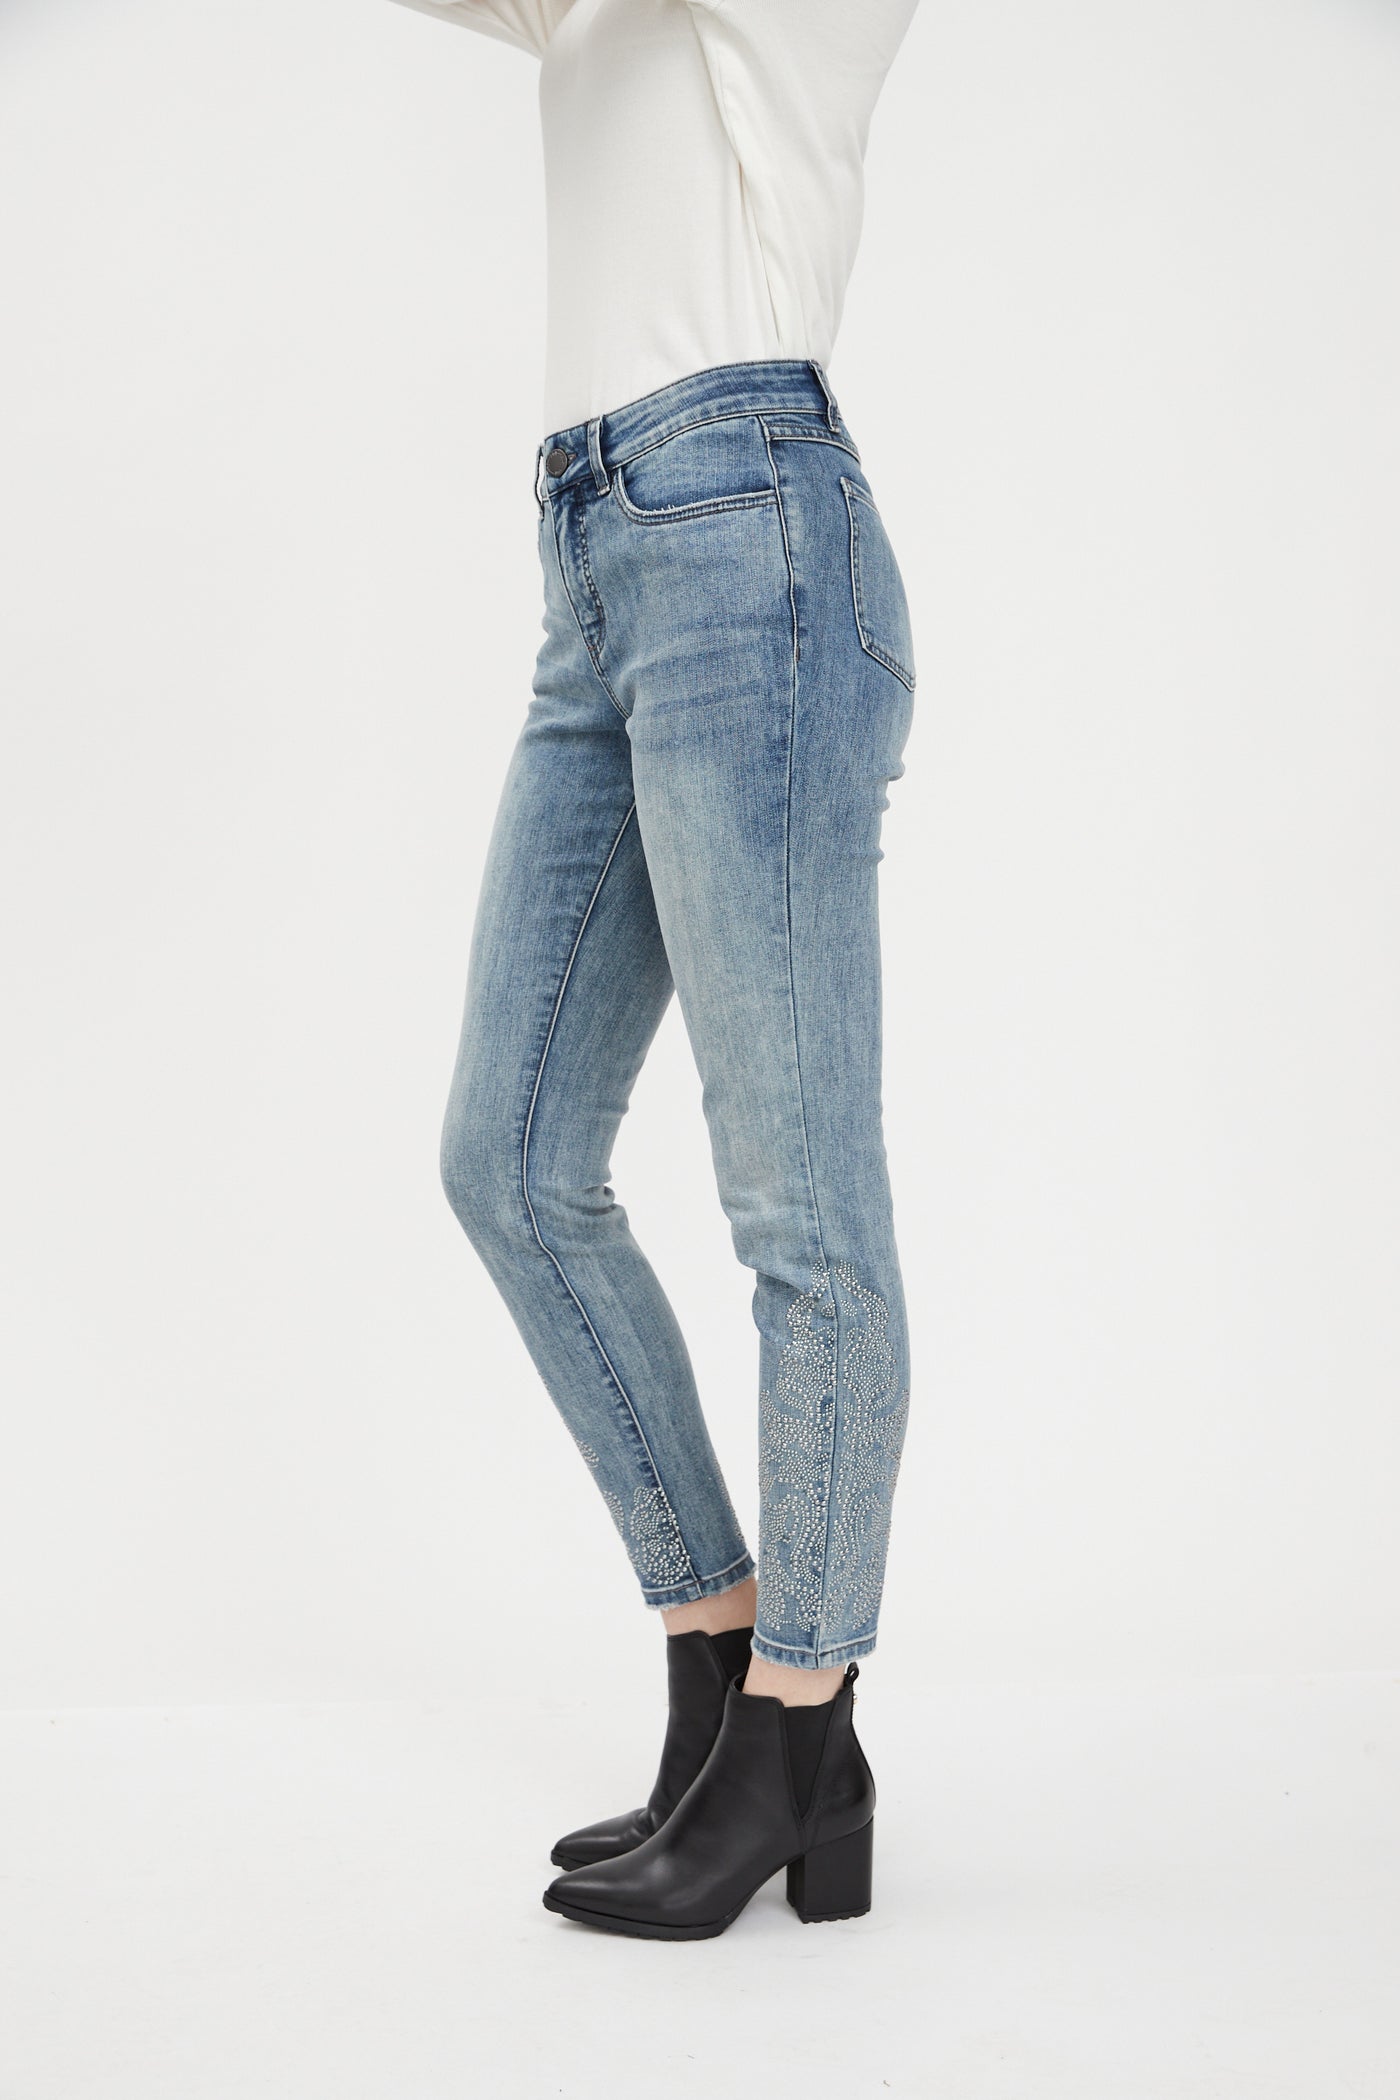 French Dressing Jeans Olivia Jeweled Slim Ankle 